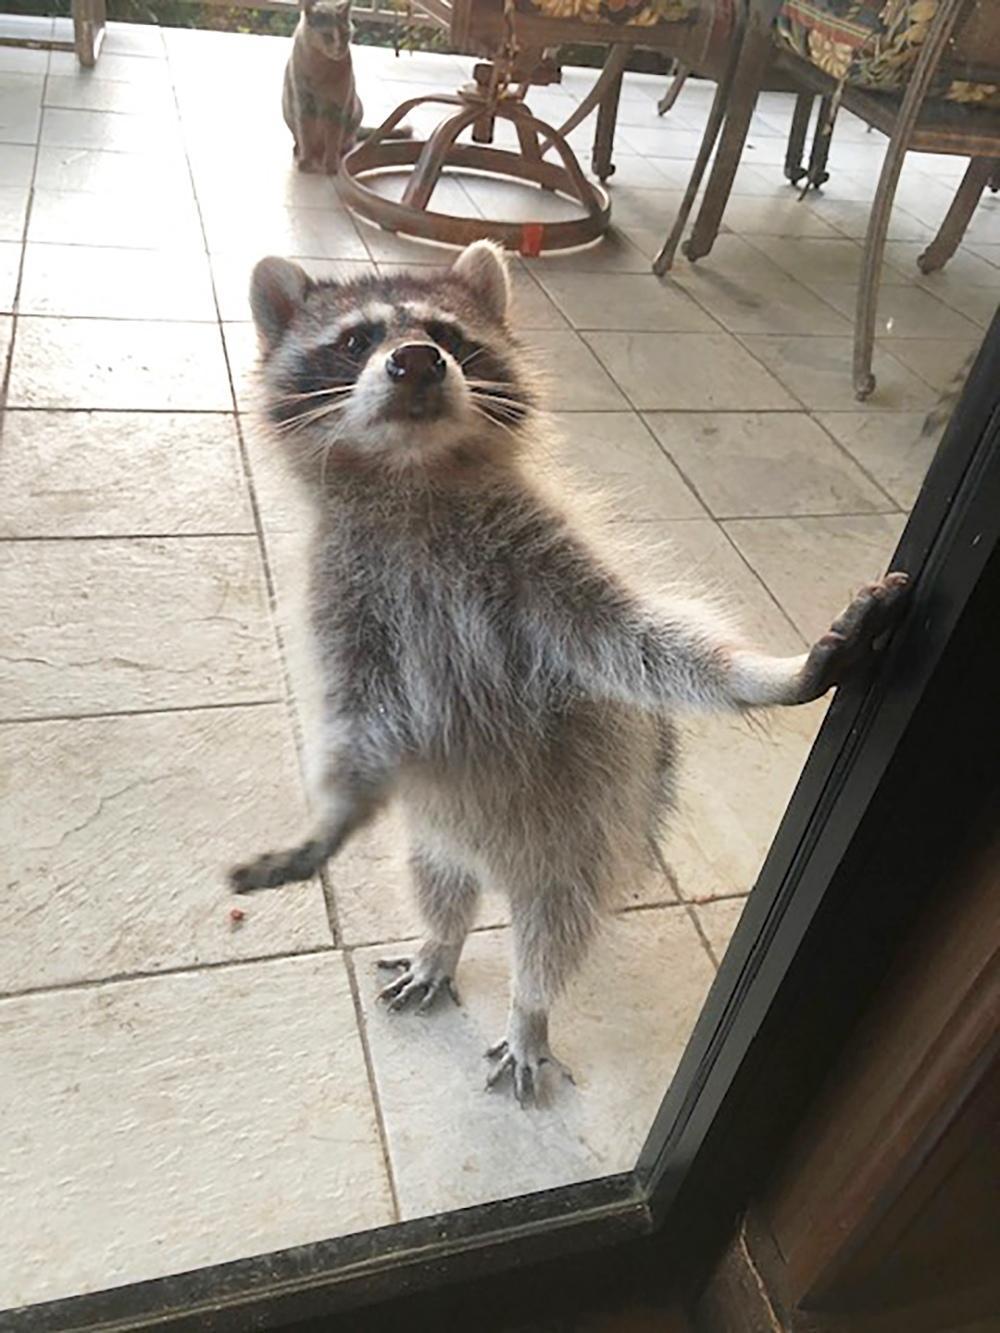 A raccoon stands on its hind legs at a doorway, looking forward with its paws slightly raised, in a human-like greeting pose.